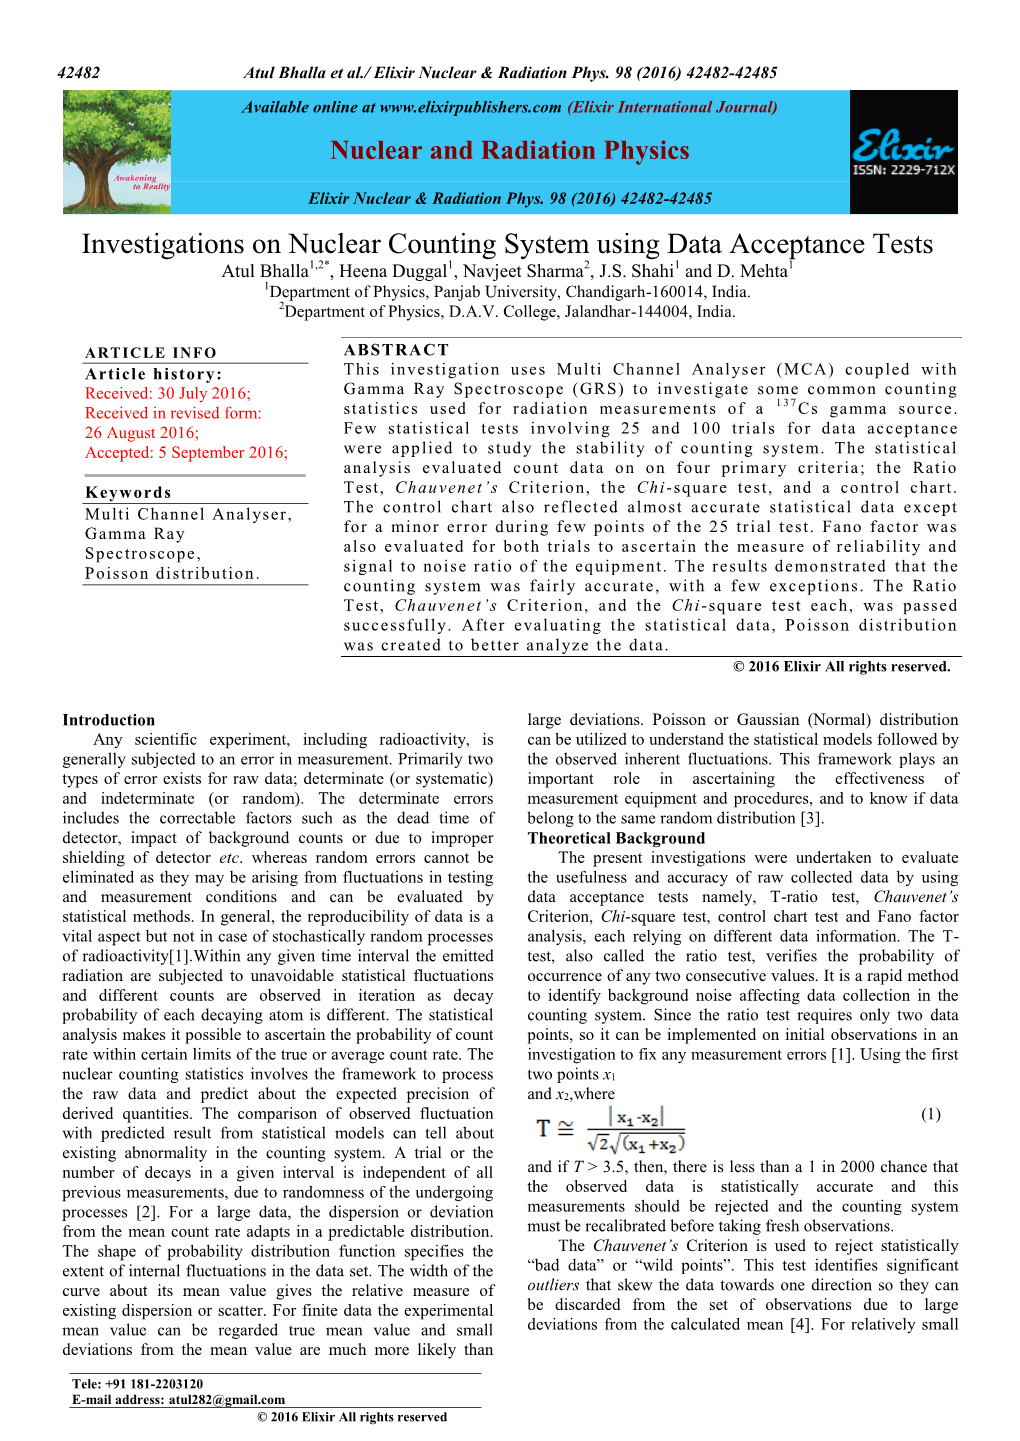 Investigations on Nuclear Counting System Using Data Acceptance Tests Atul Bhalla1,2*, Heena Duggal1, Navjeet Sharma2, J.S